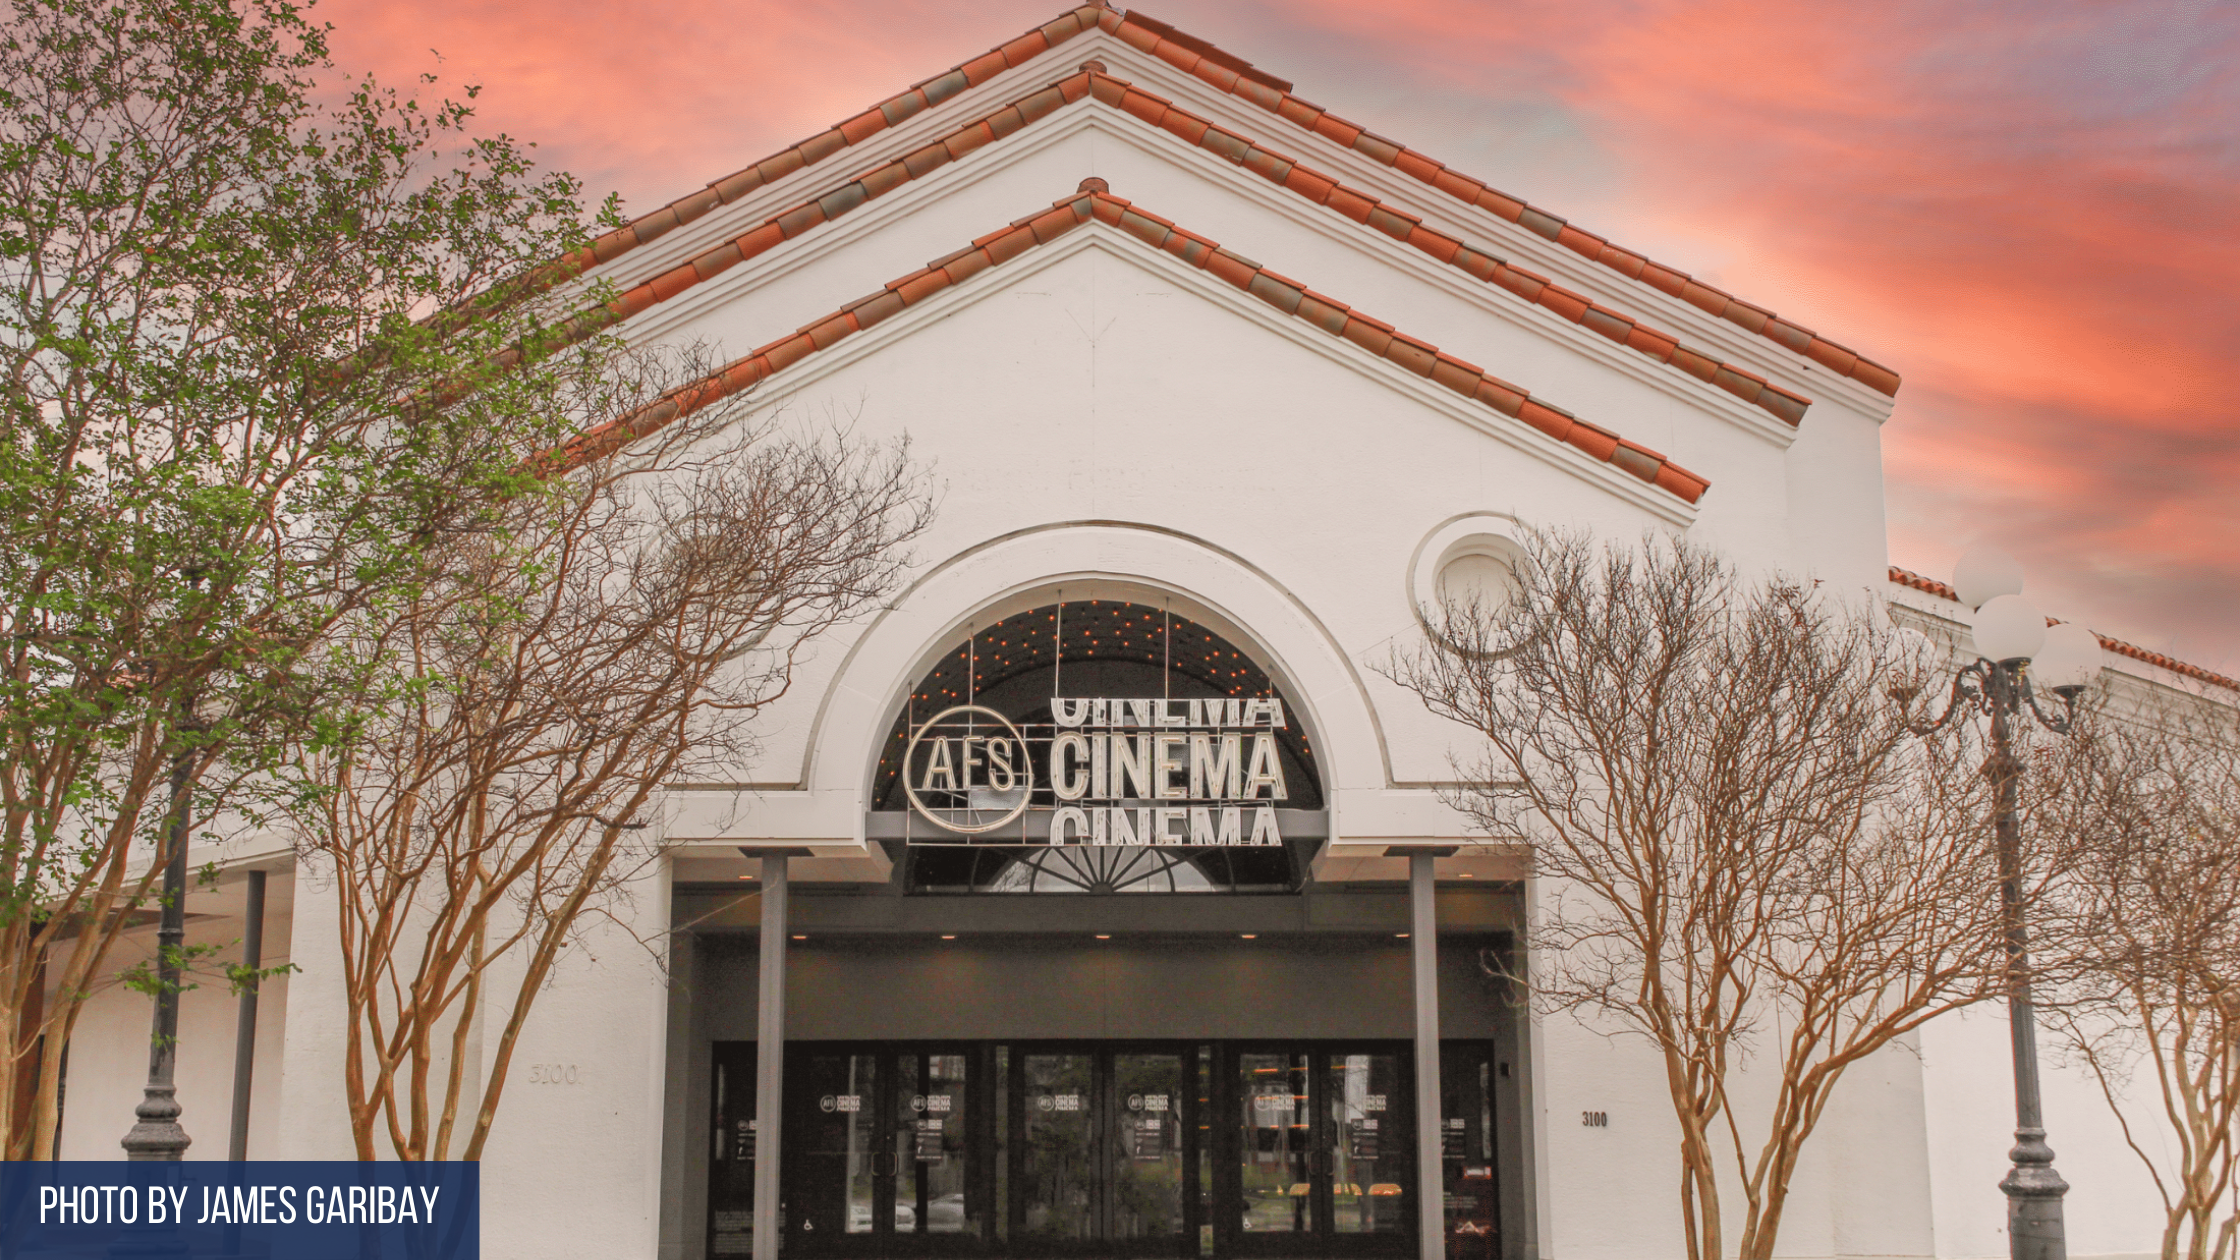 AFS Cinema - The official theater of Austin Film Society. This theater plays movies from local, up and coming filmmakers. Austin Film Society gives financial grants to filmmakers looking to break into the industry. Independent Filmmakers are fortunate enough to have their work shown here and have locals view their art.Address: 6259 Middle Fiskville Rd, Austin, TX 78752